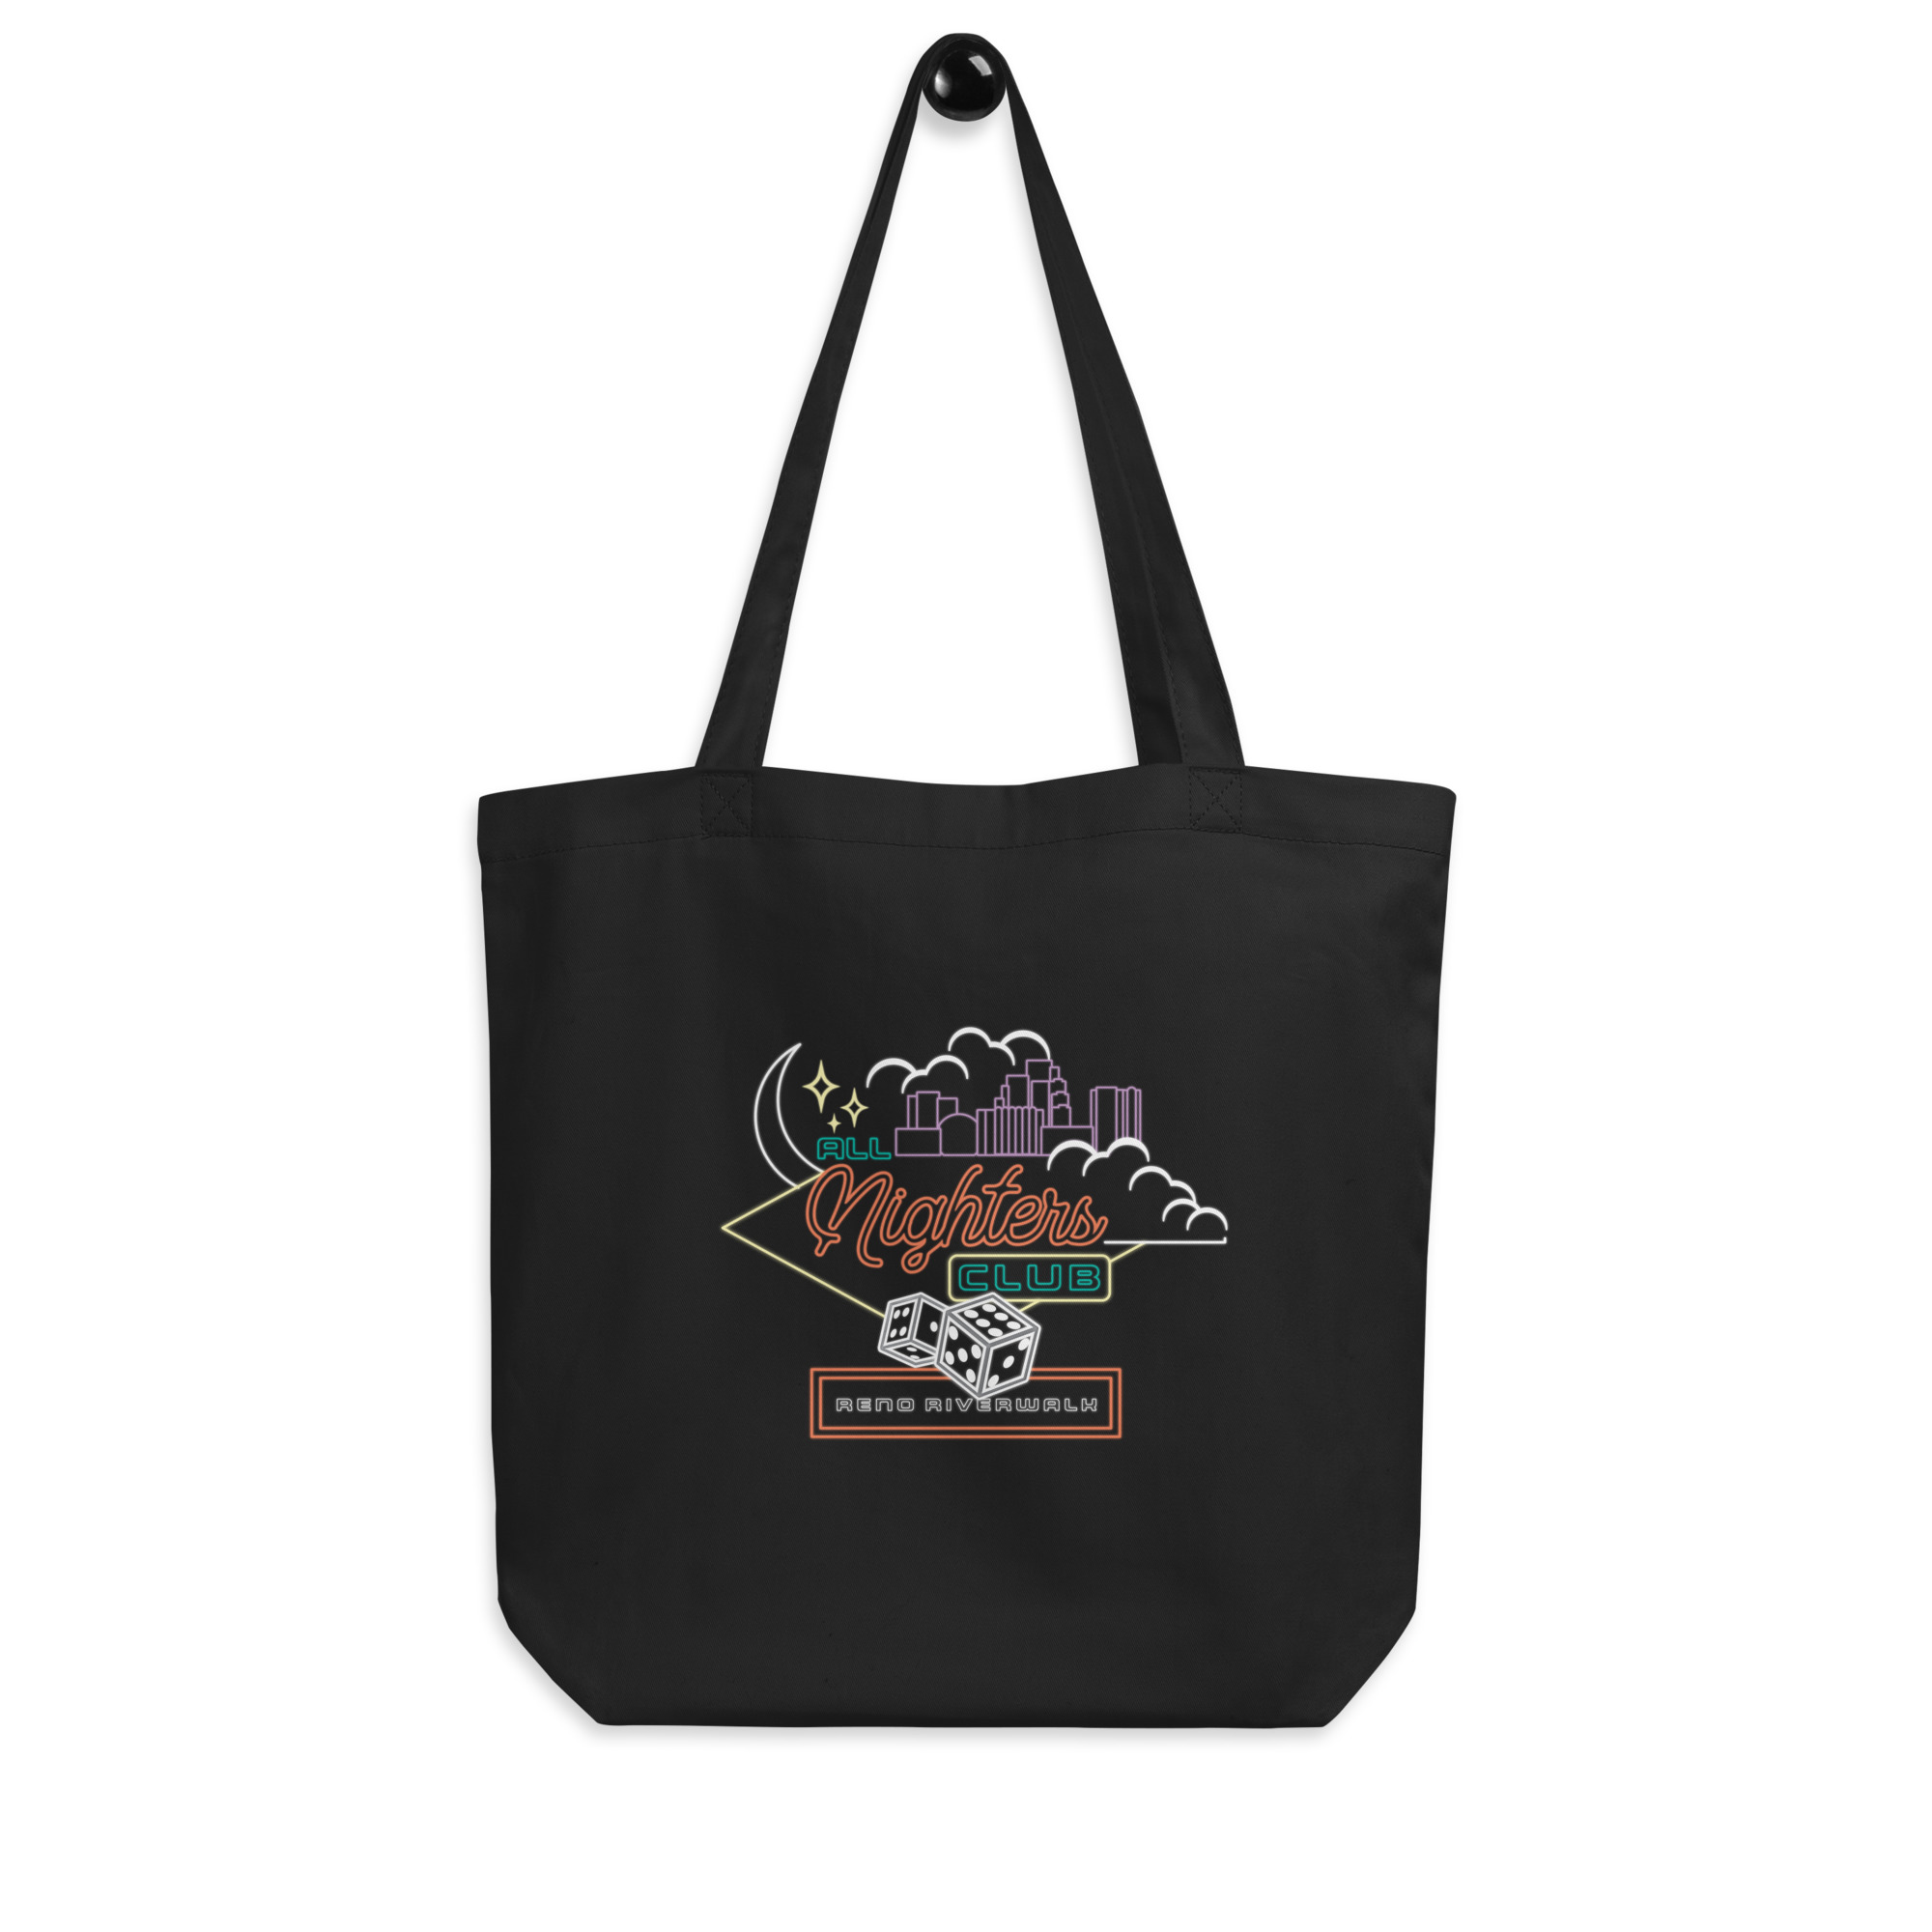 All Nighter's Club Eco Tote Bag